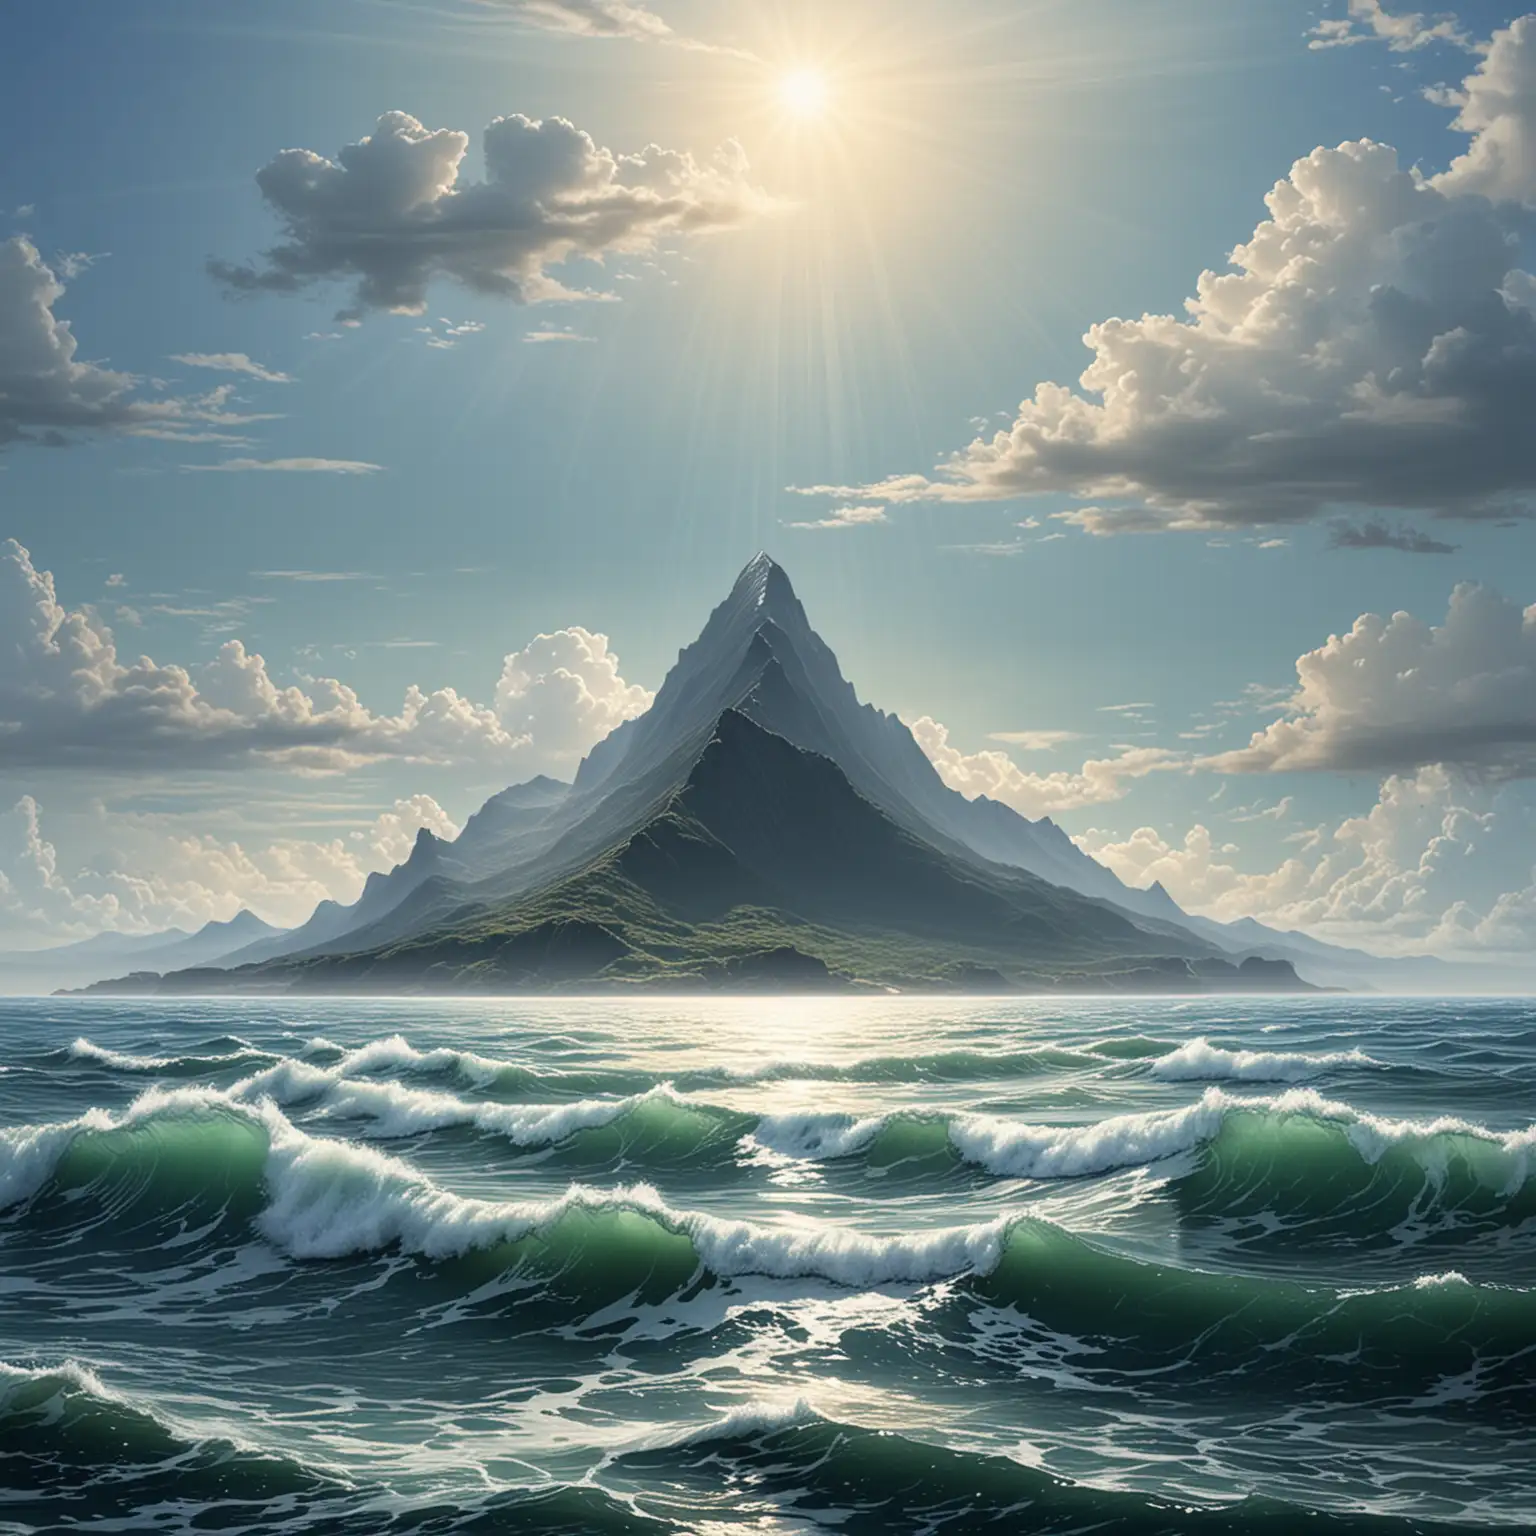 Serenity Majestic Mountain Rising from Vast Ocean